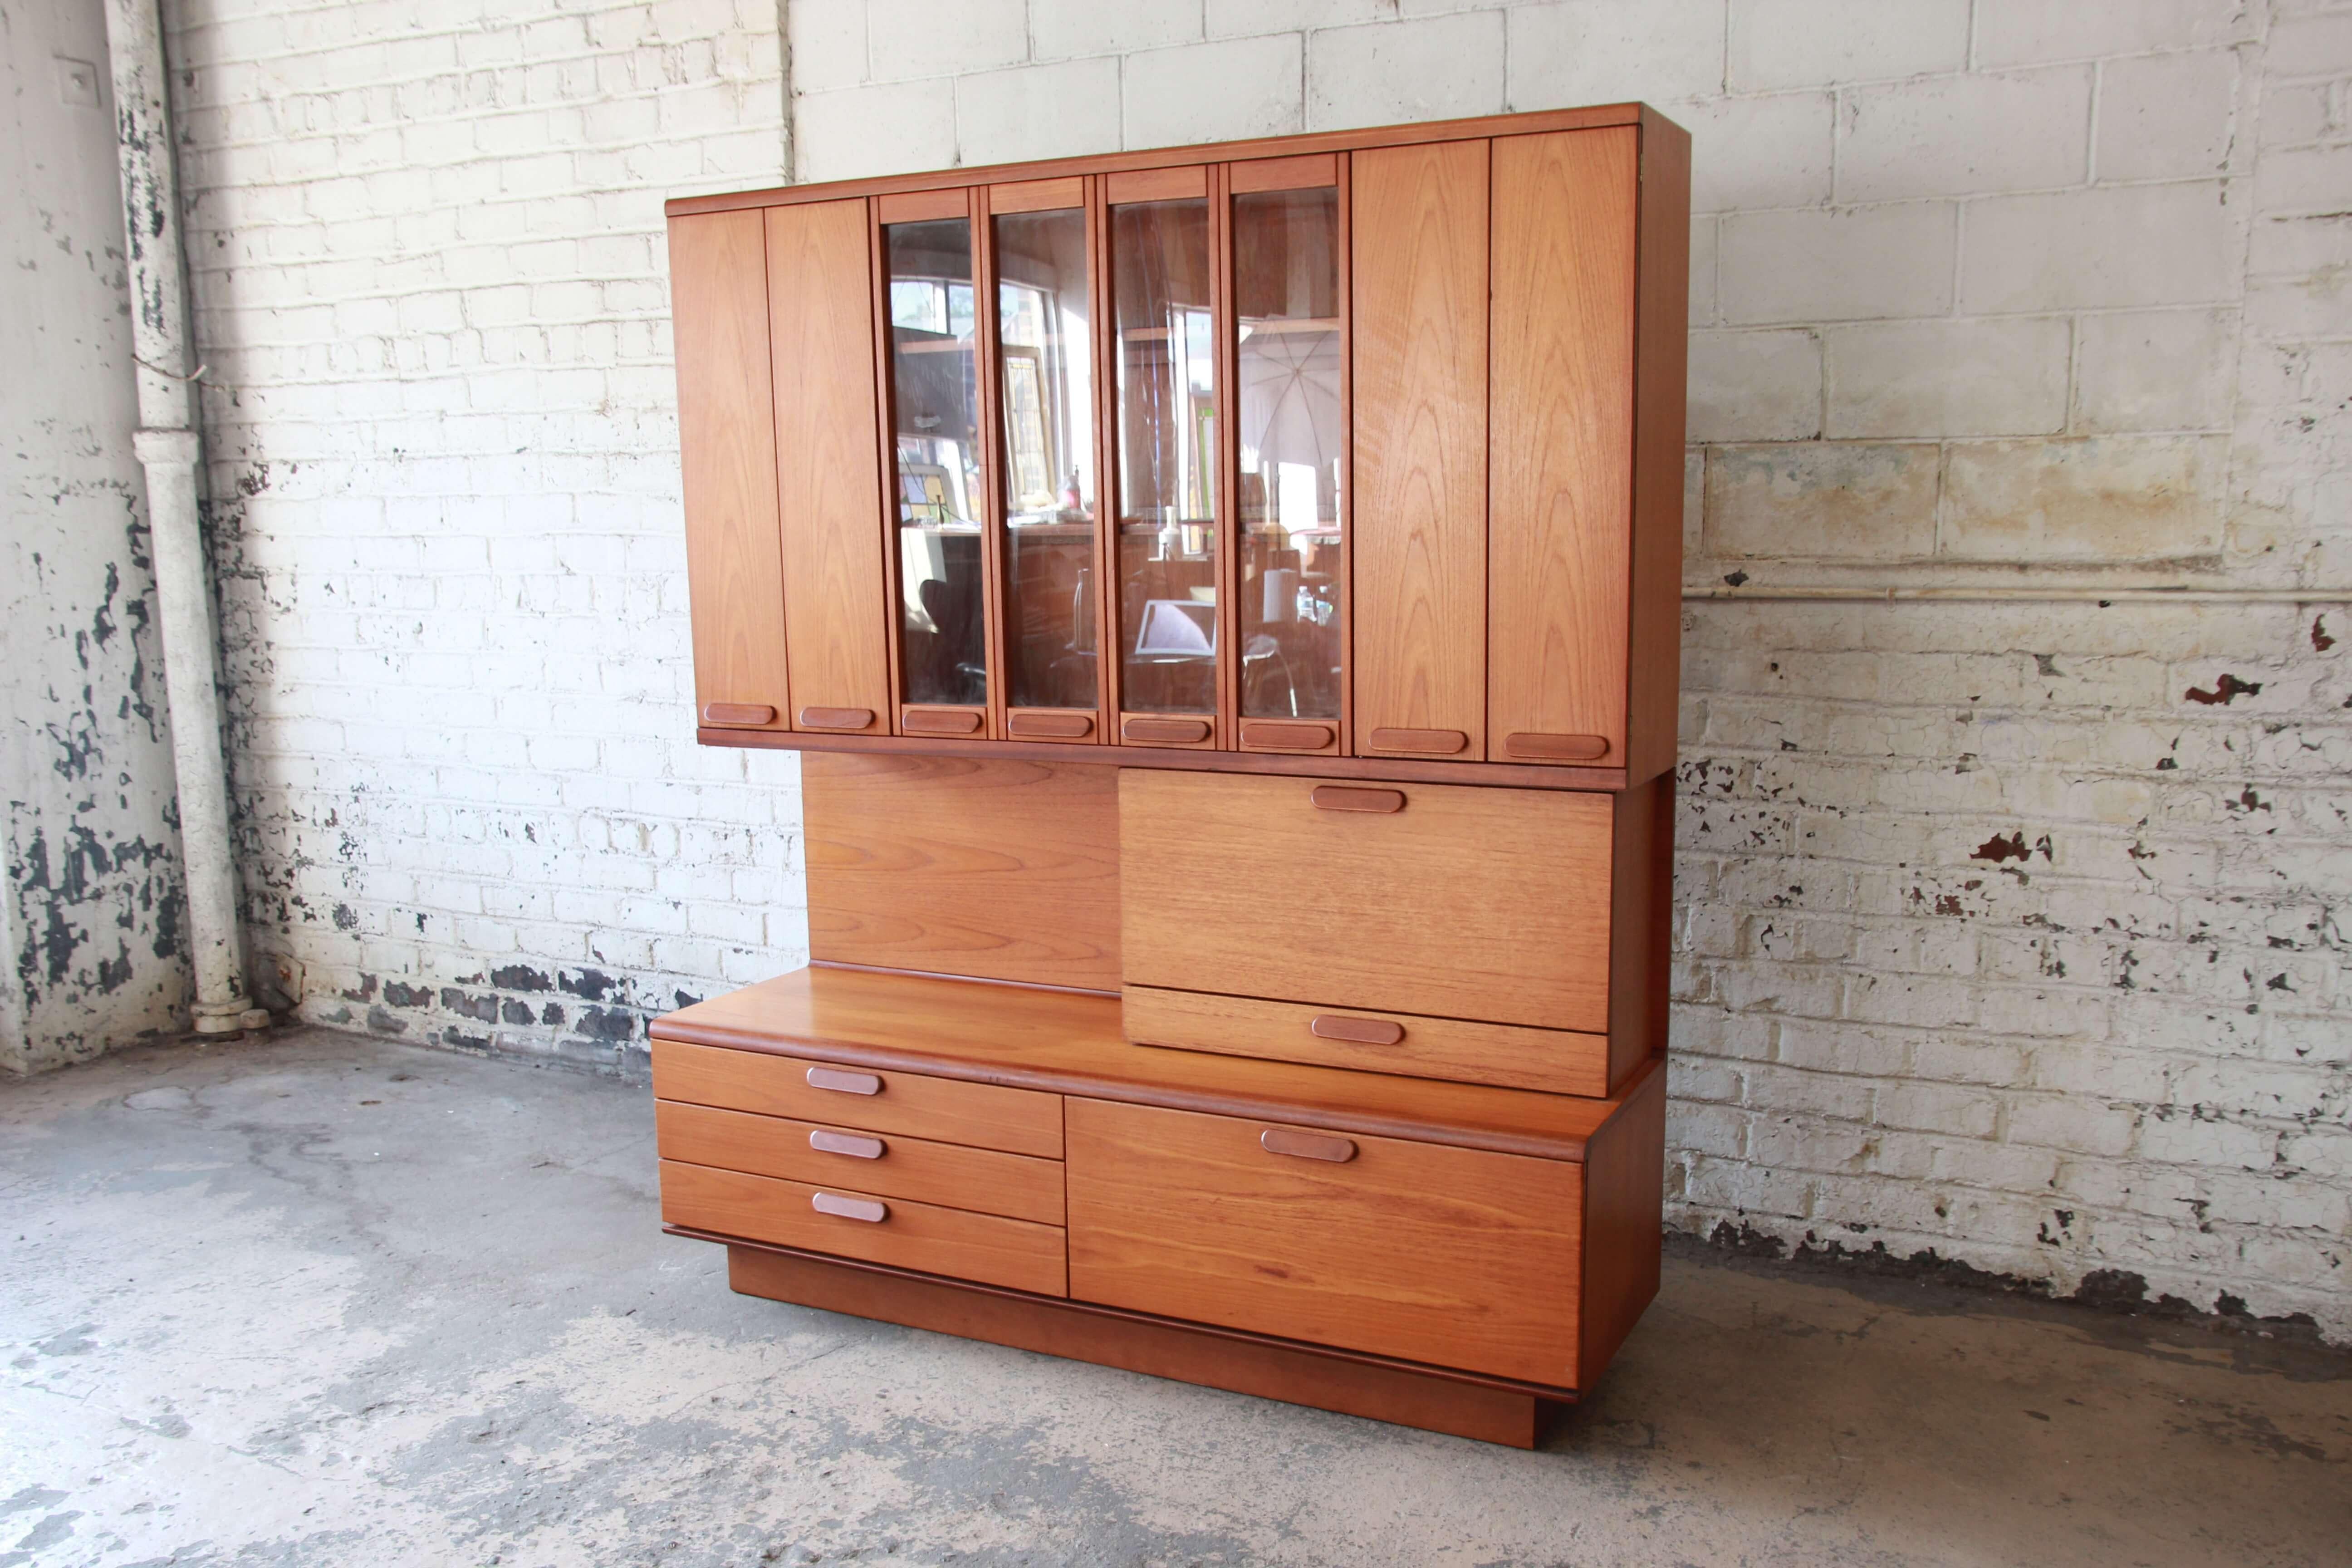 Offering a very nice Danish teak bar wall unit. The cabinet has a great teak wood grain with distinct Scandinavian design. The lower portion has three drawers for storage and a drop-front cabinet space. Just above is a mirrored drop-front cabinet